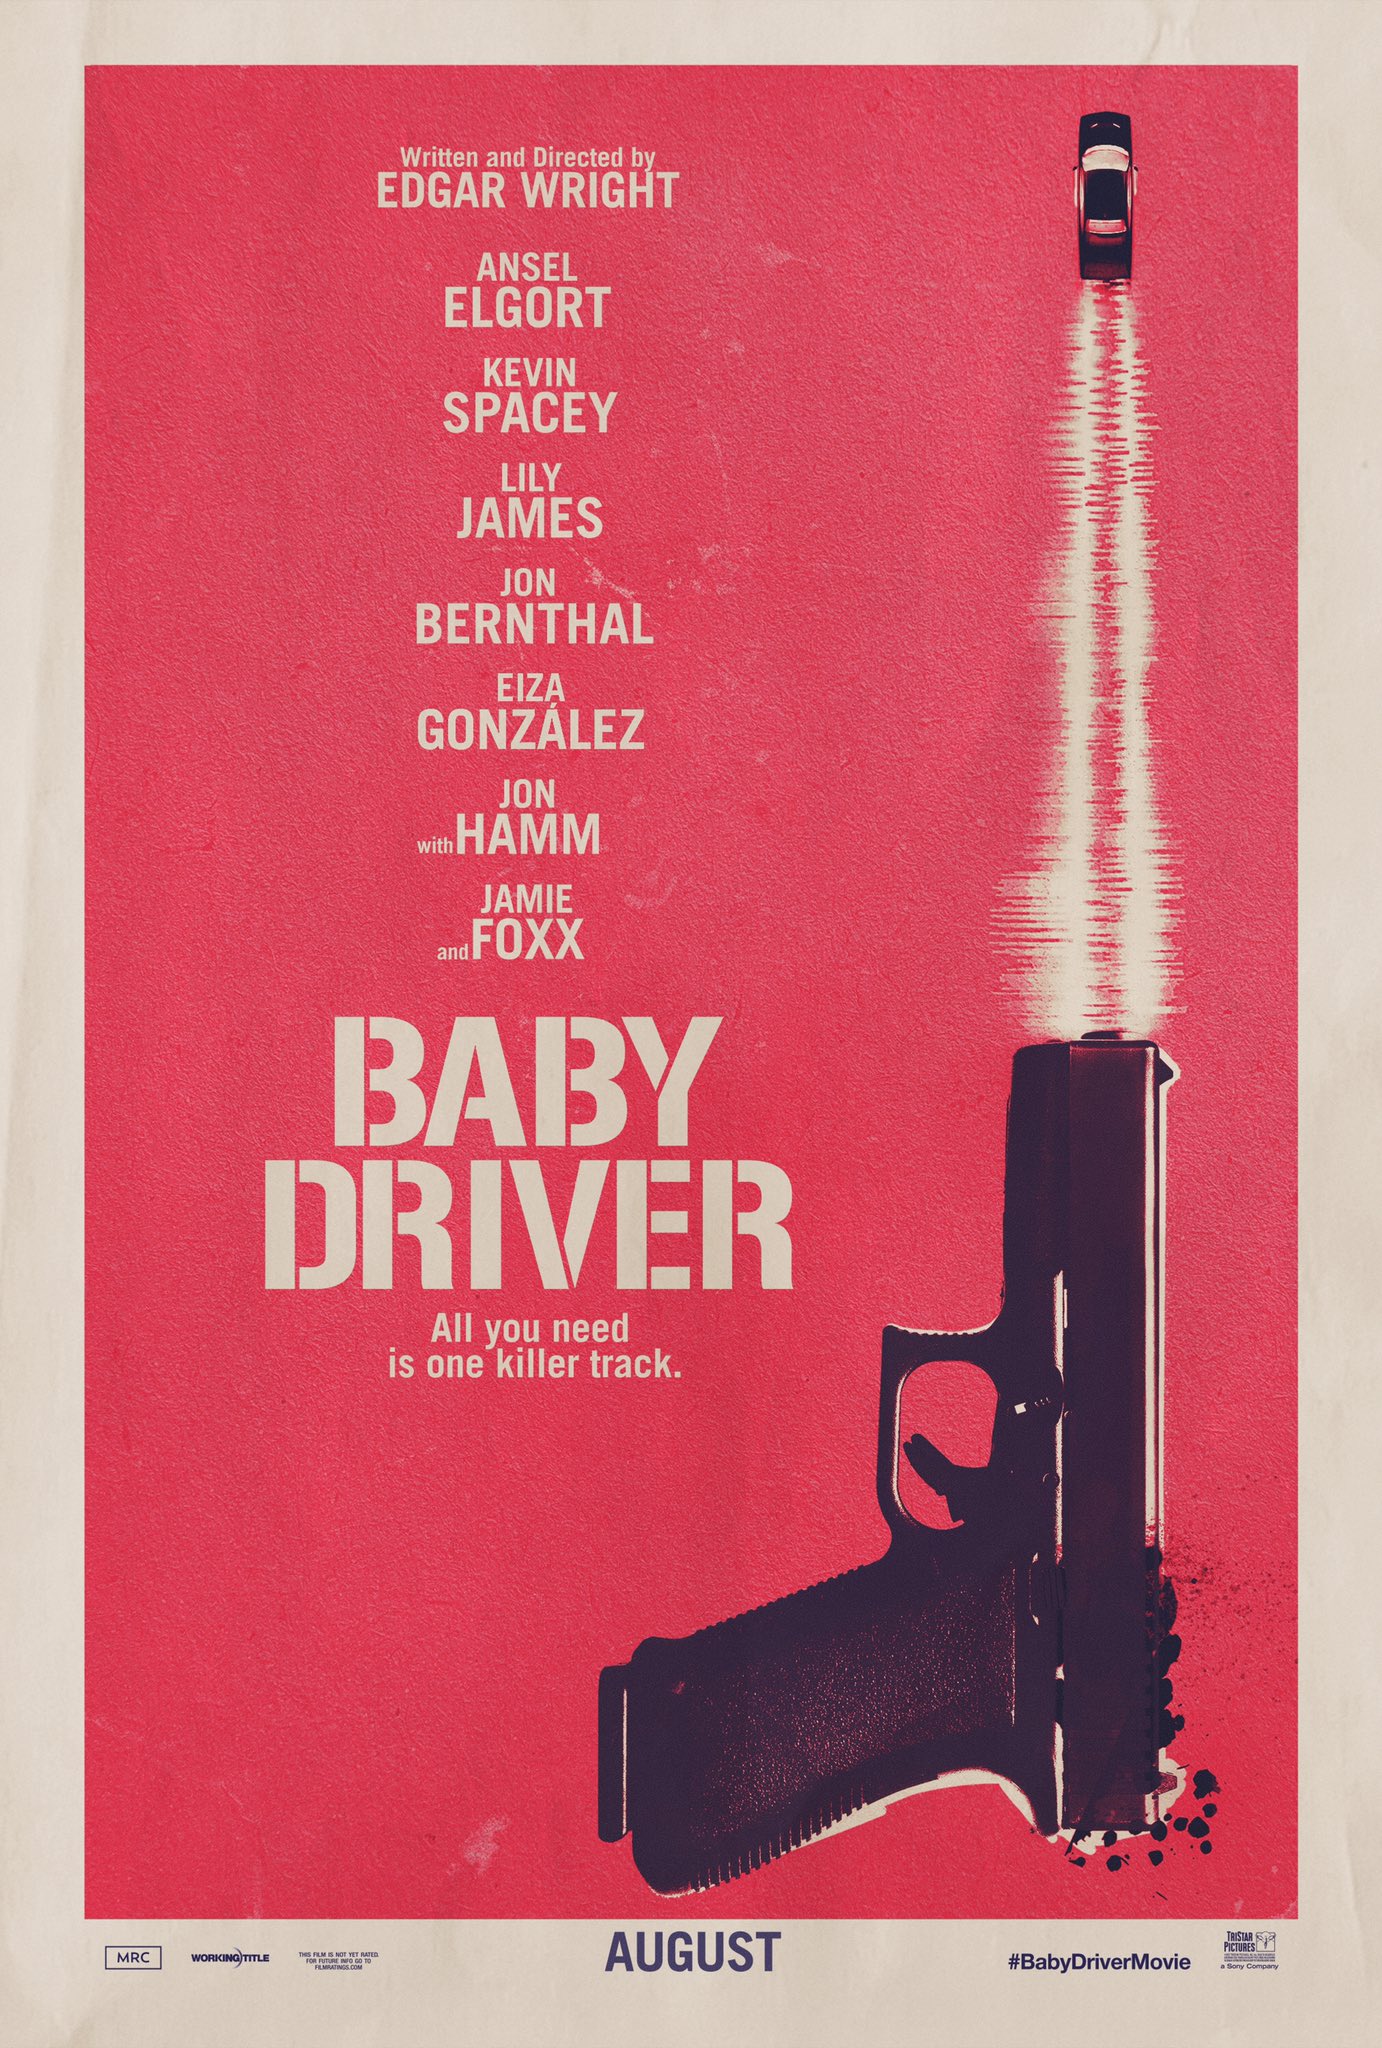 baby driver - Baby Driver : tuer n'est pas jouer babydriver